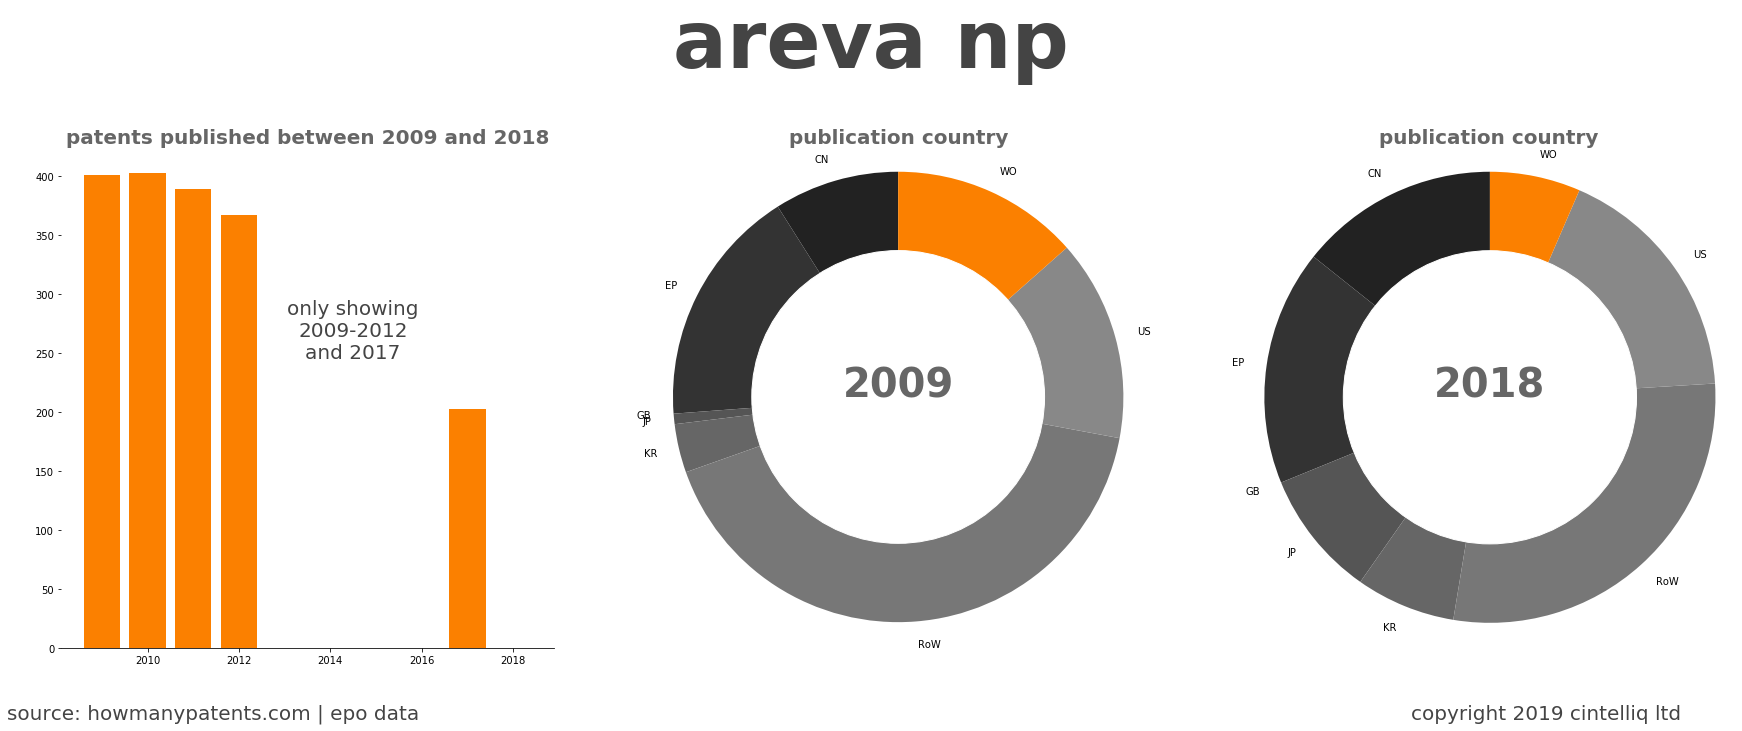 summary of patents for Areva Np